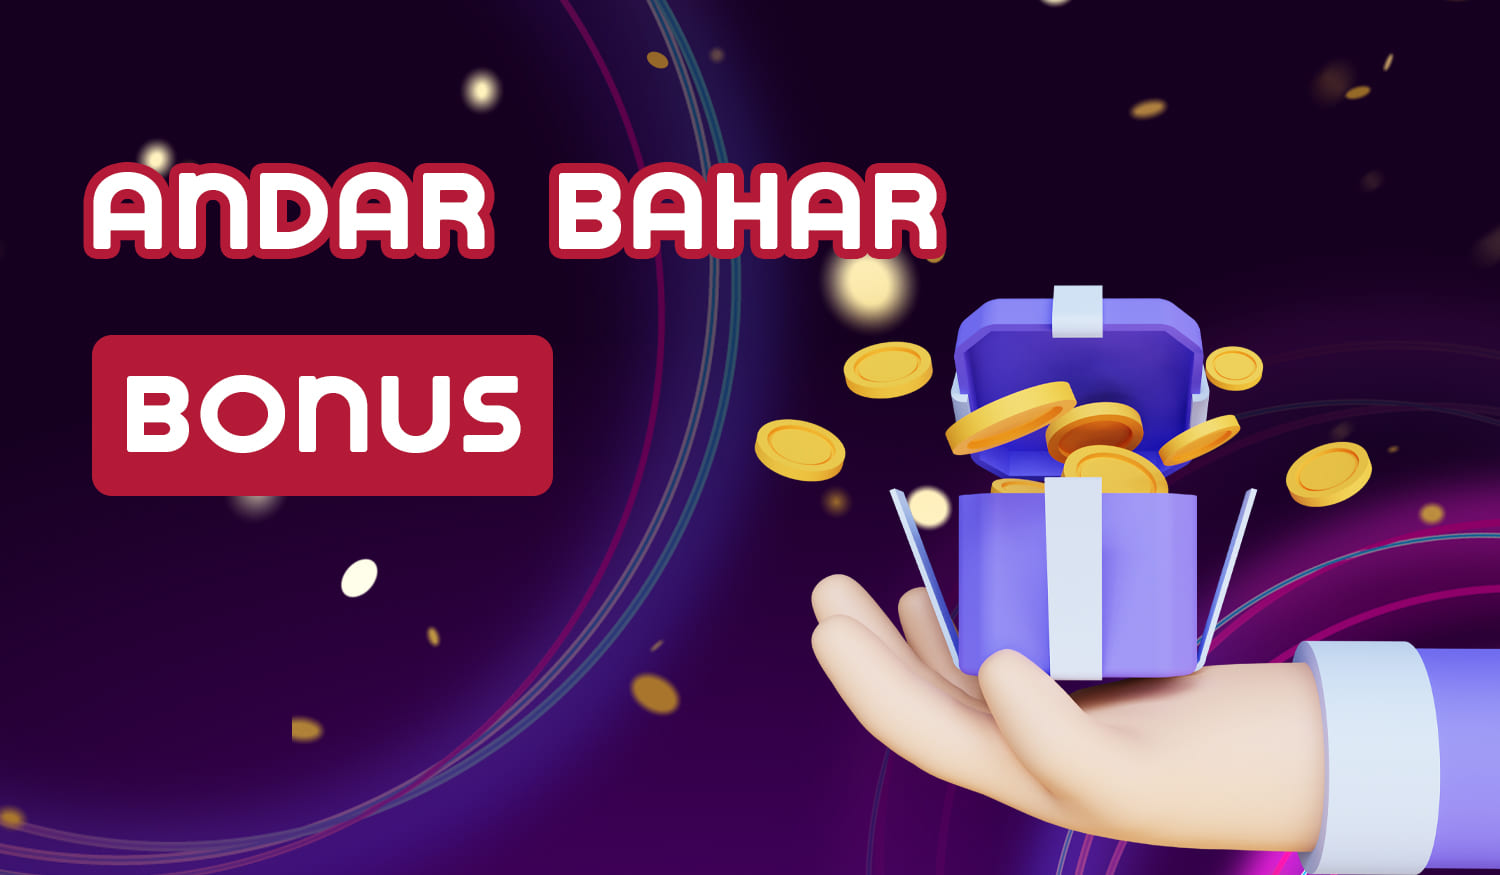 What bonuses and promo codes are available to Indian users while playing Andar Bahar online